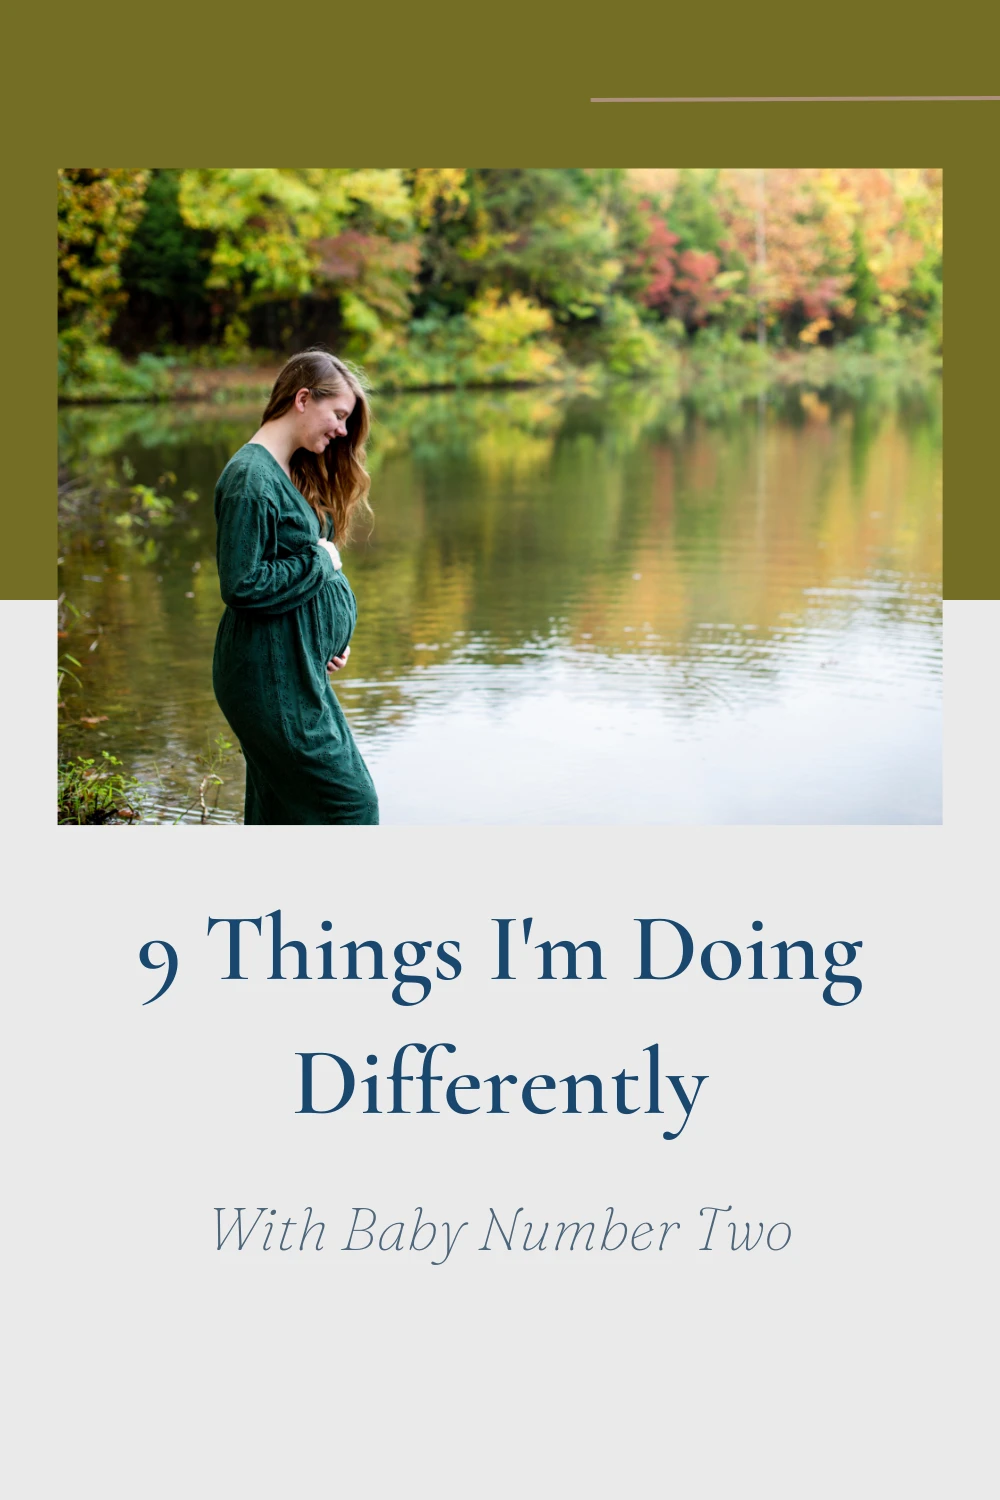 What I'm Doing Differently with Baby Number Two